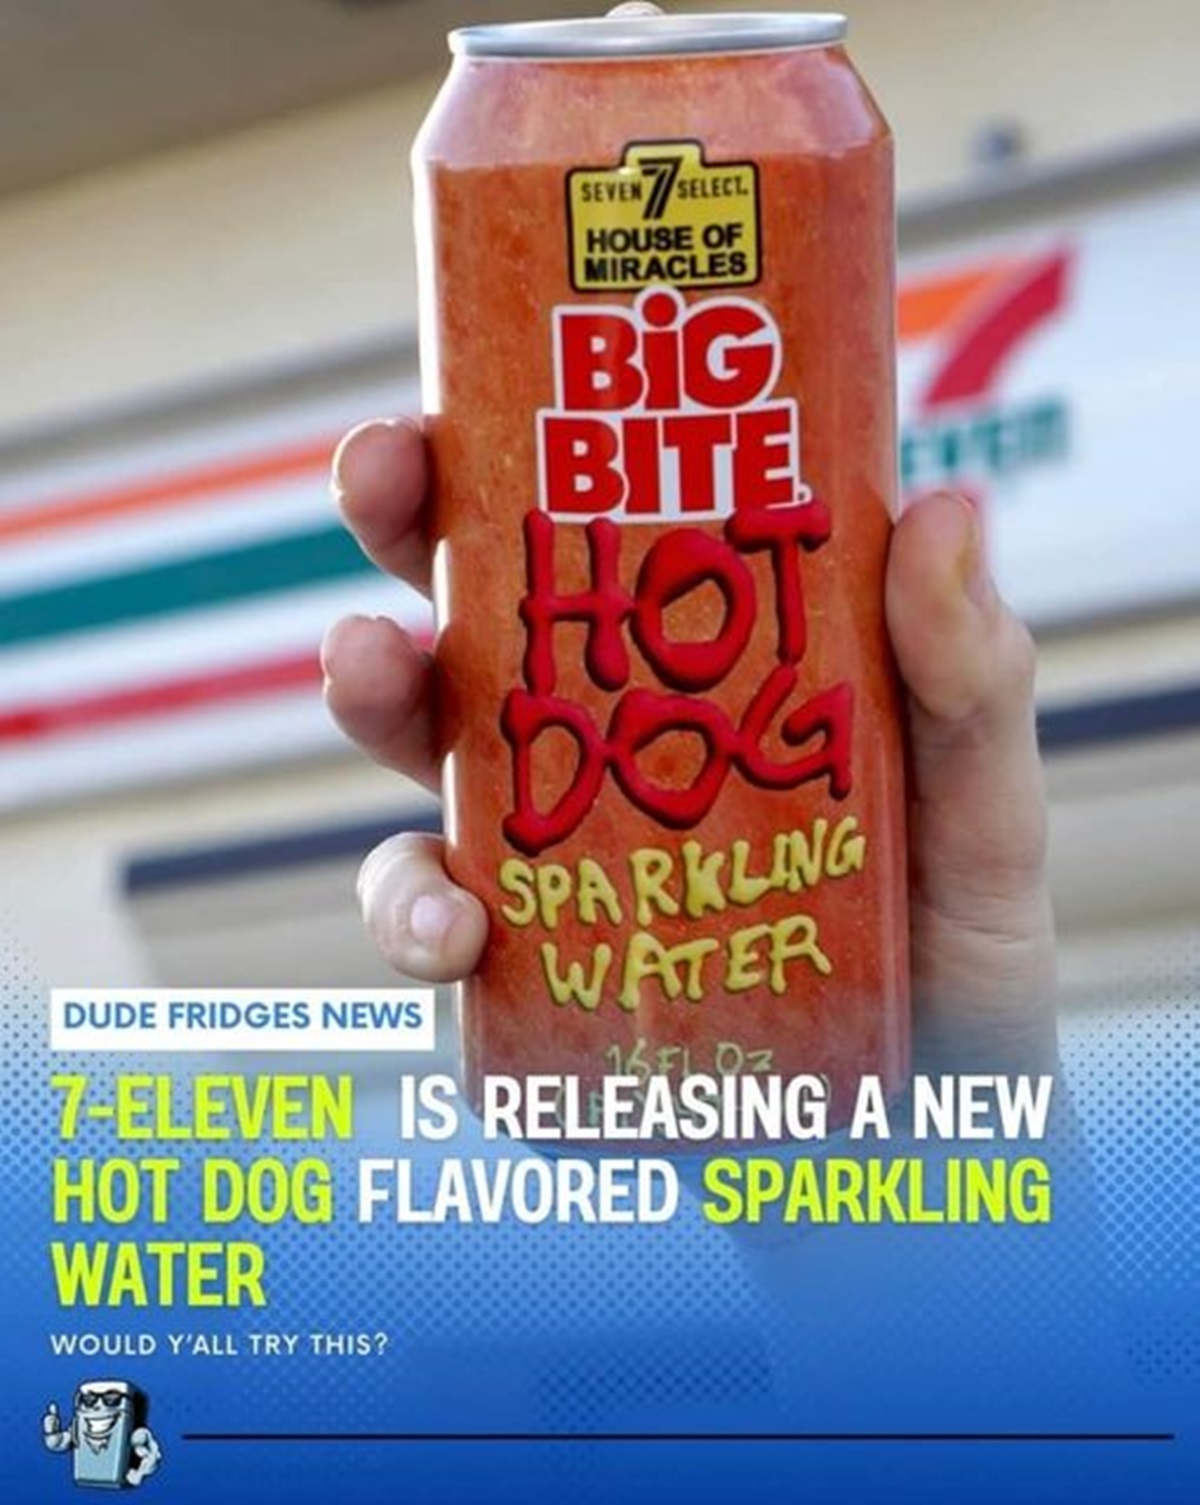 soft drink - Dude Fridges News Seven Select 7 House Of Miracles Big Biter Hot Dog Sparkling Water 16 Fl Oz 7Eleven Is Releasing A New Hot Dog Flavored Sparkling Water Would Y'All Try This?